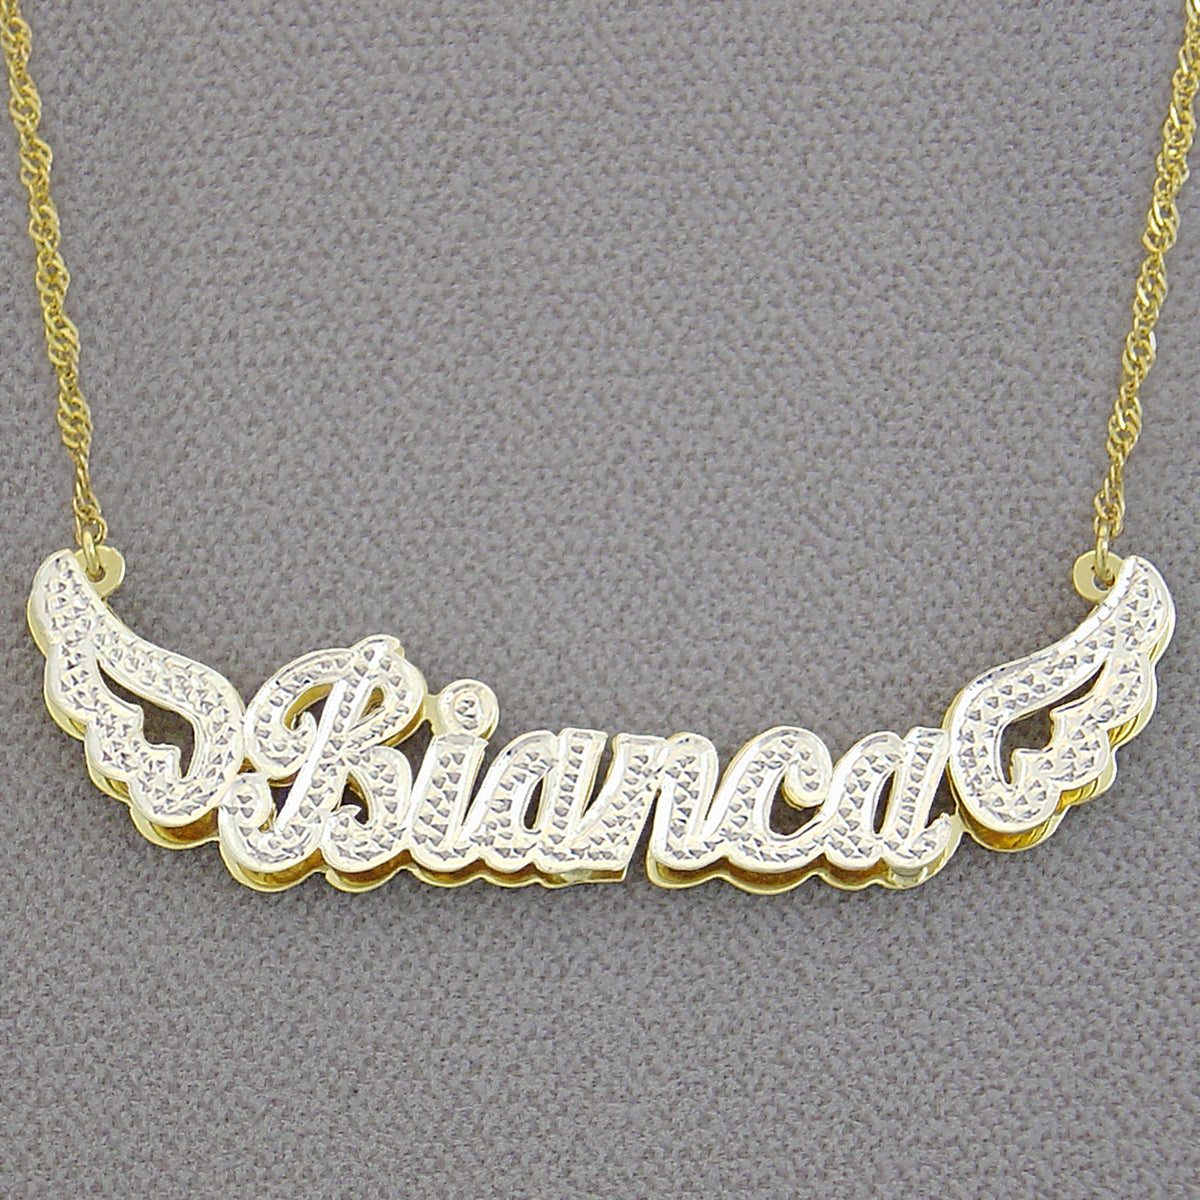 Solid Gold Personalized 3D Diamond Iced Out Name Pendant Angel Wings Jewelry ND40X